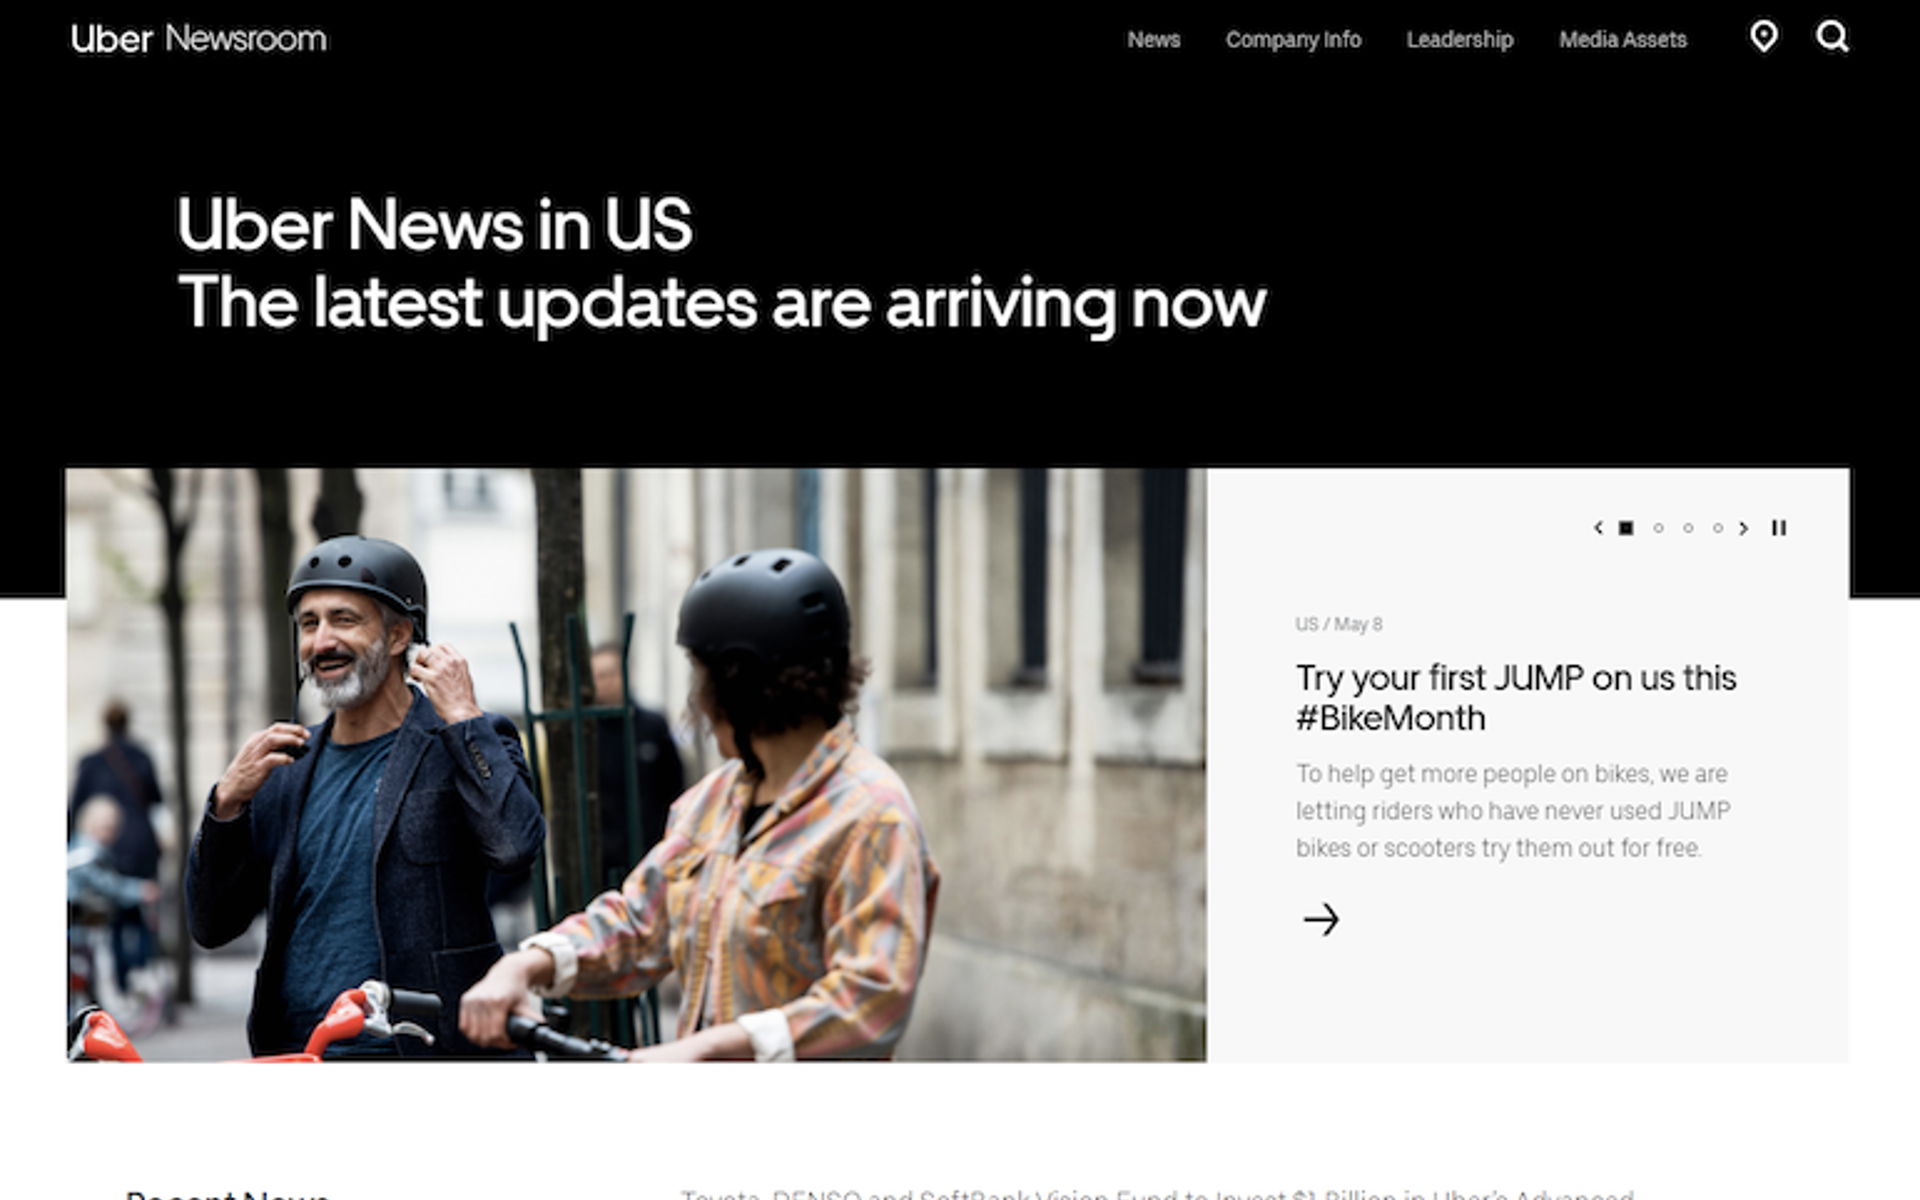 Uber's press kit integrates seamlessly into their newsroom